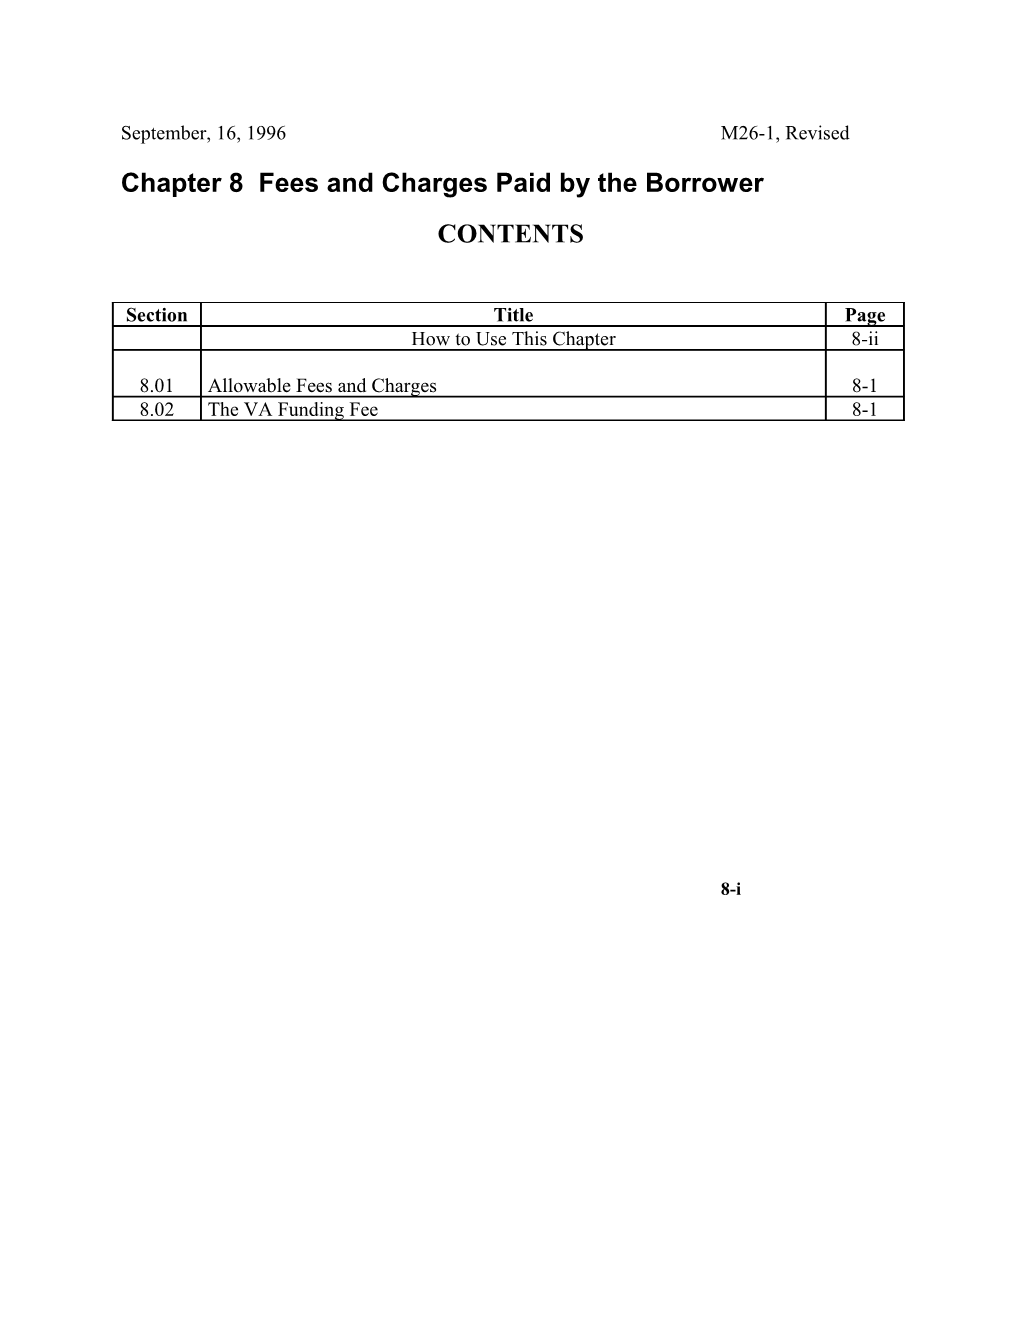 Chapter 8 Fees and Charges Paid by the Borrower